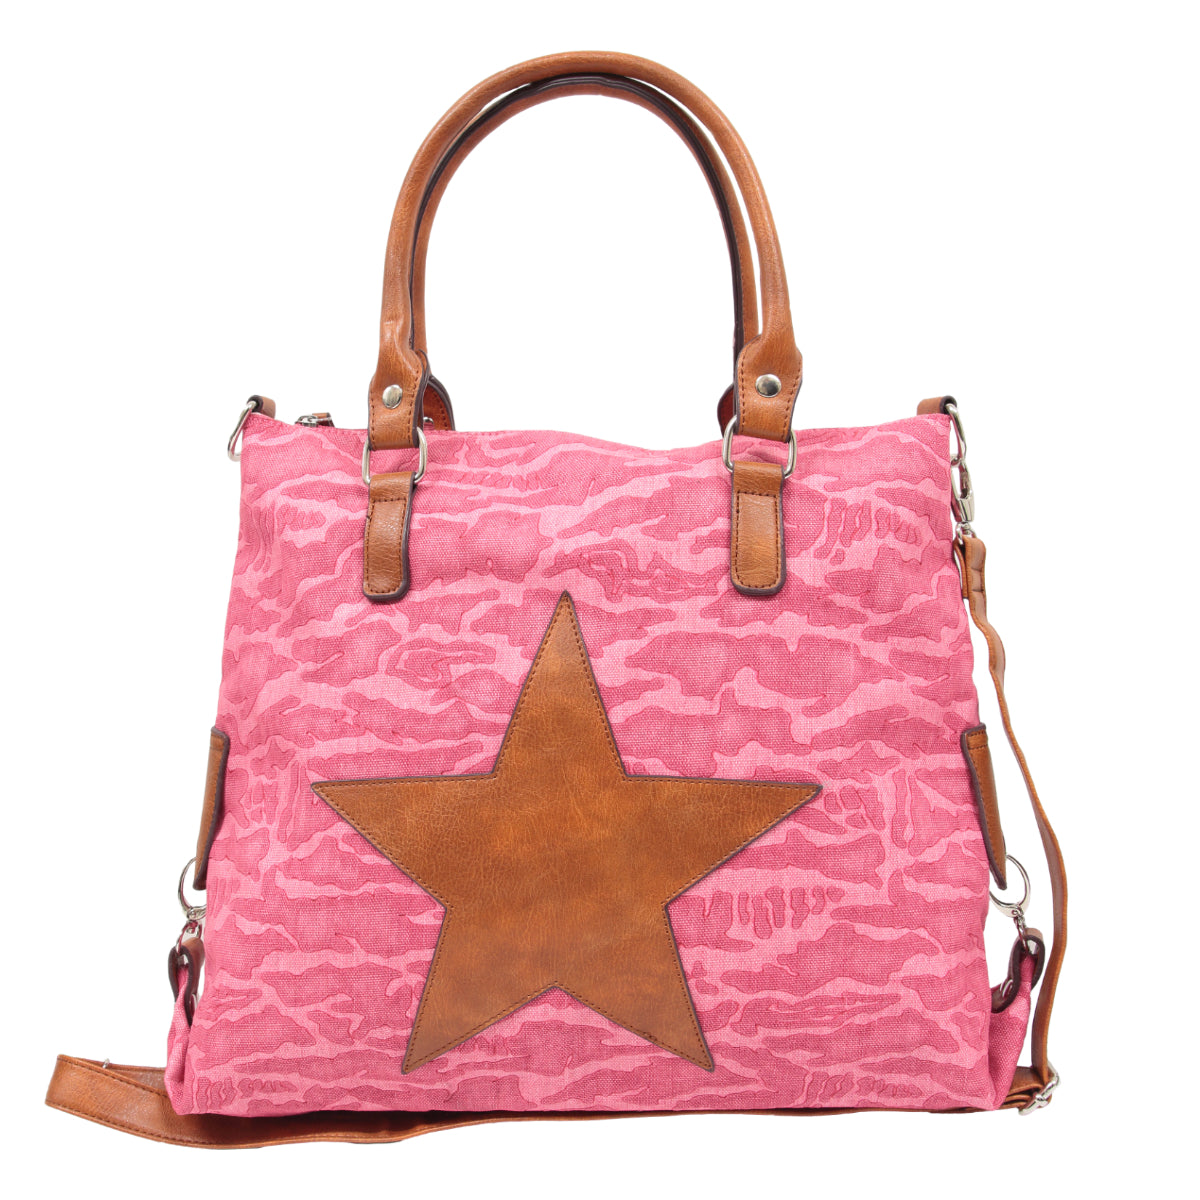 Gold Star Bag – One Accord Sumter